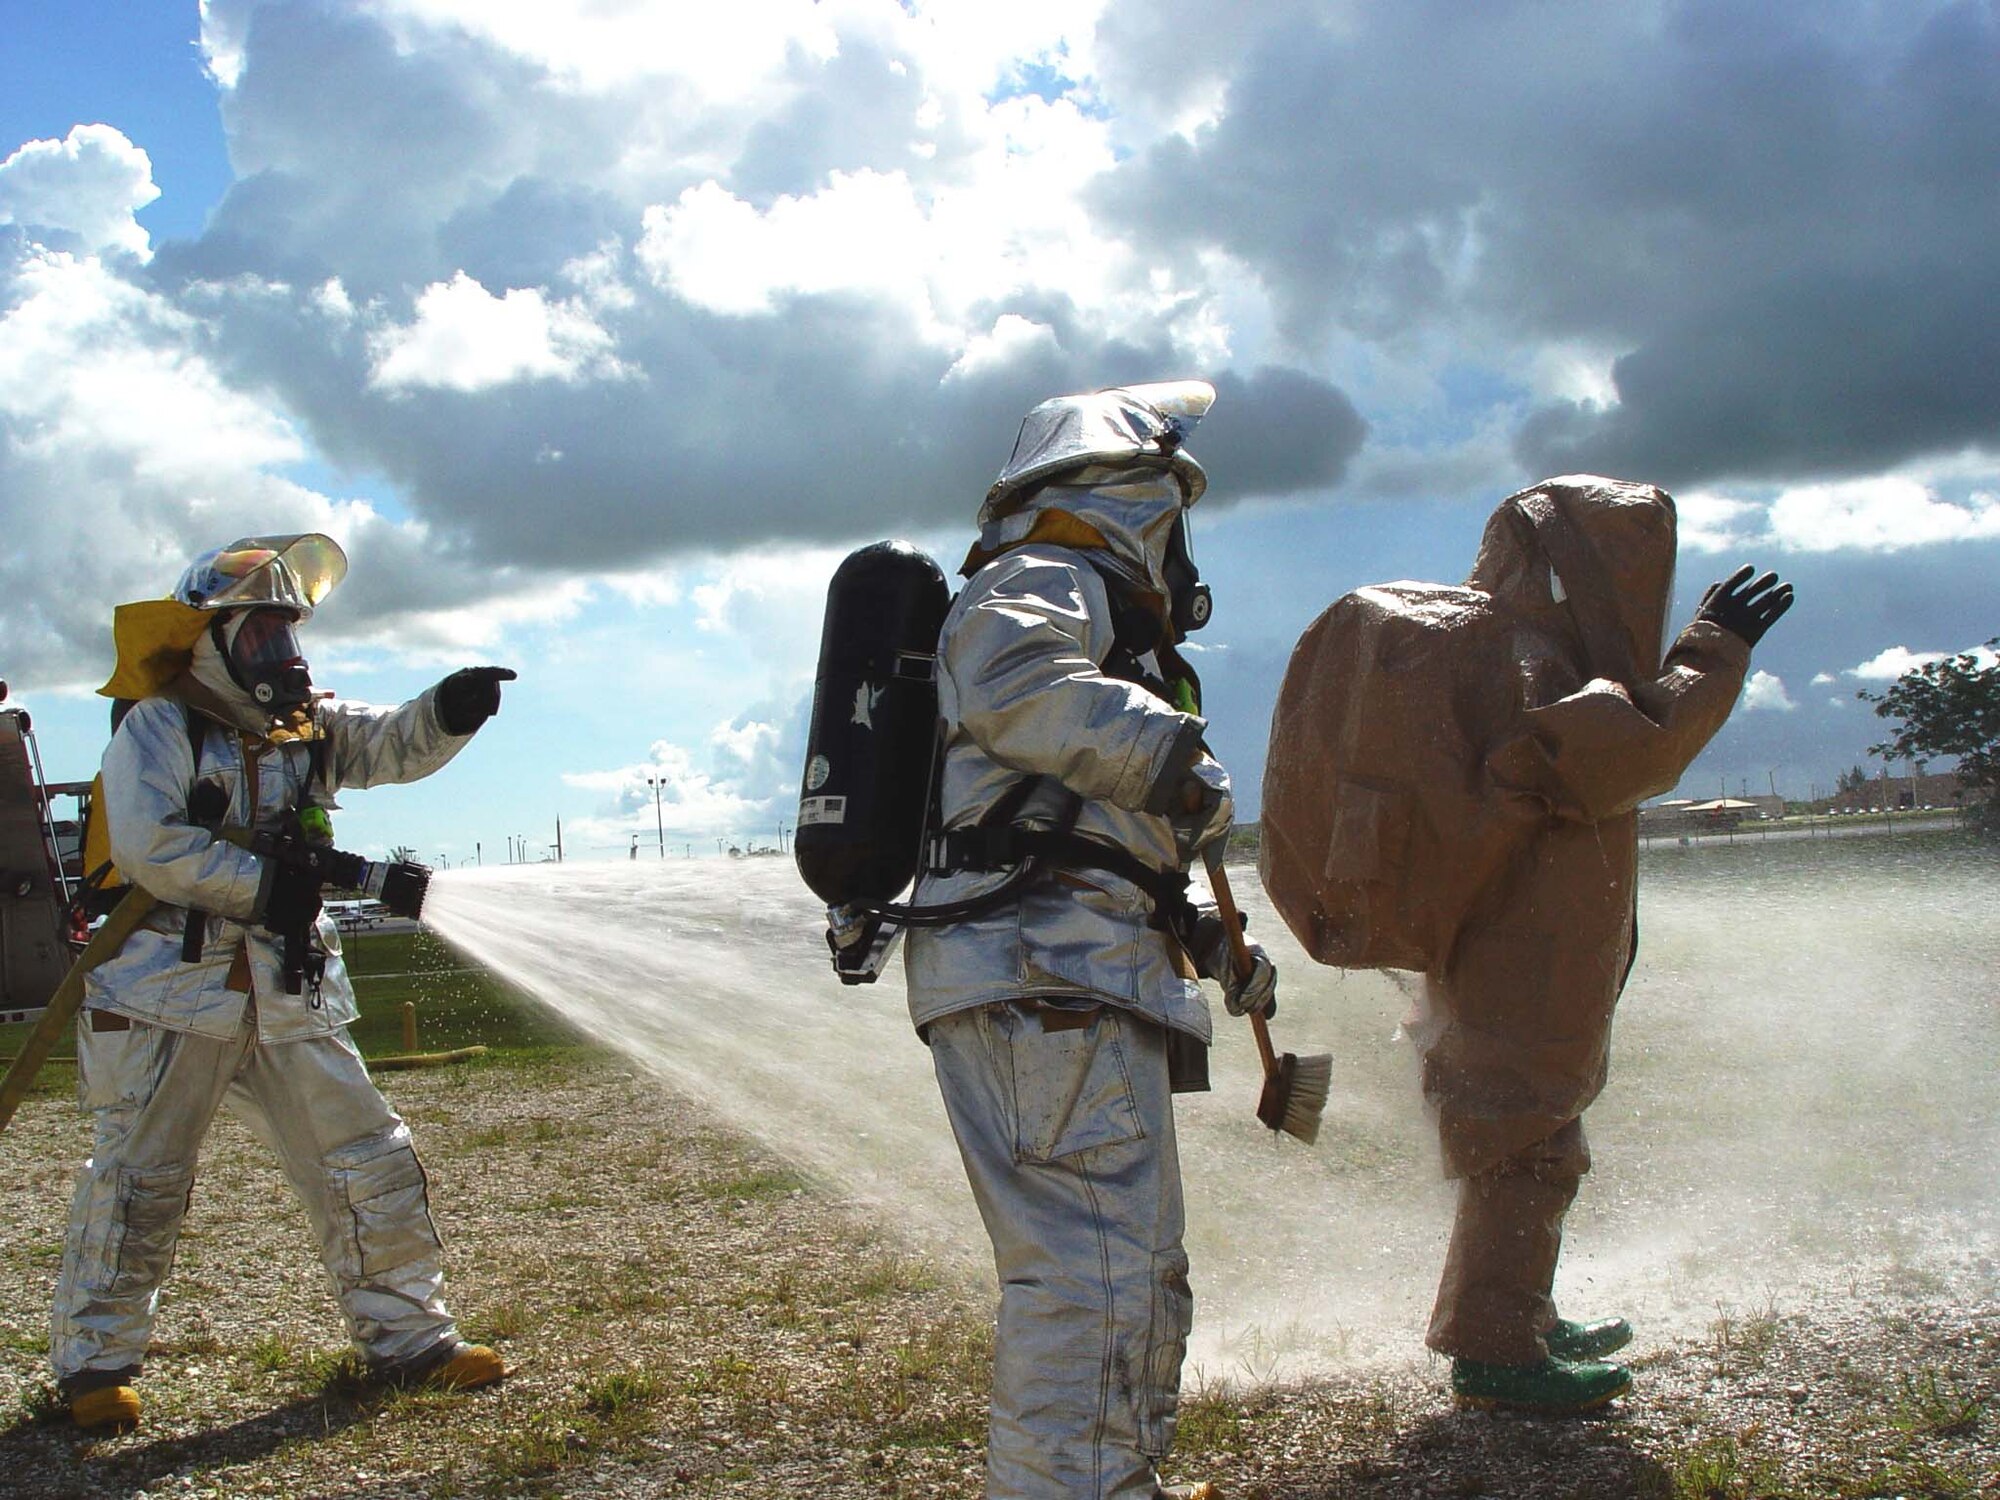 Firefighters from the 482nd Civil Engineering Squadron practice decontamination procedures during hazardous materials training at Homestead Air Reserve Base, Fla. on June 9. Members of the base fire department train several times a year while wearing chemical and biological protective suits.  (US Air Force photo by Lisa Macias)